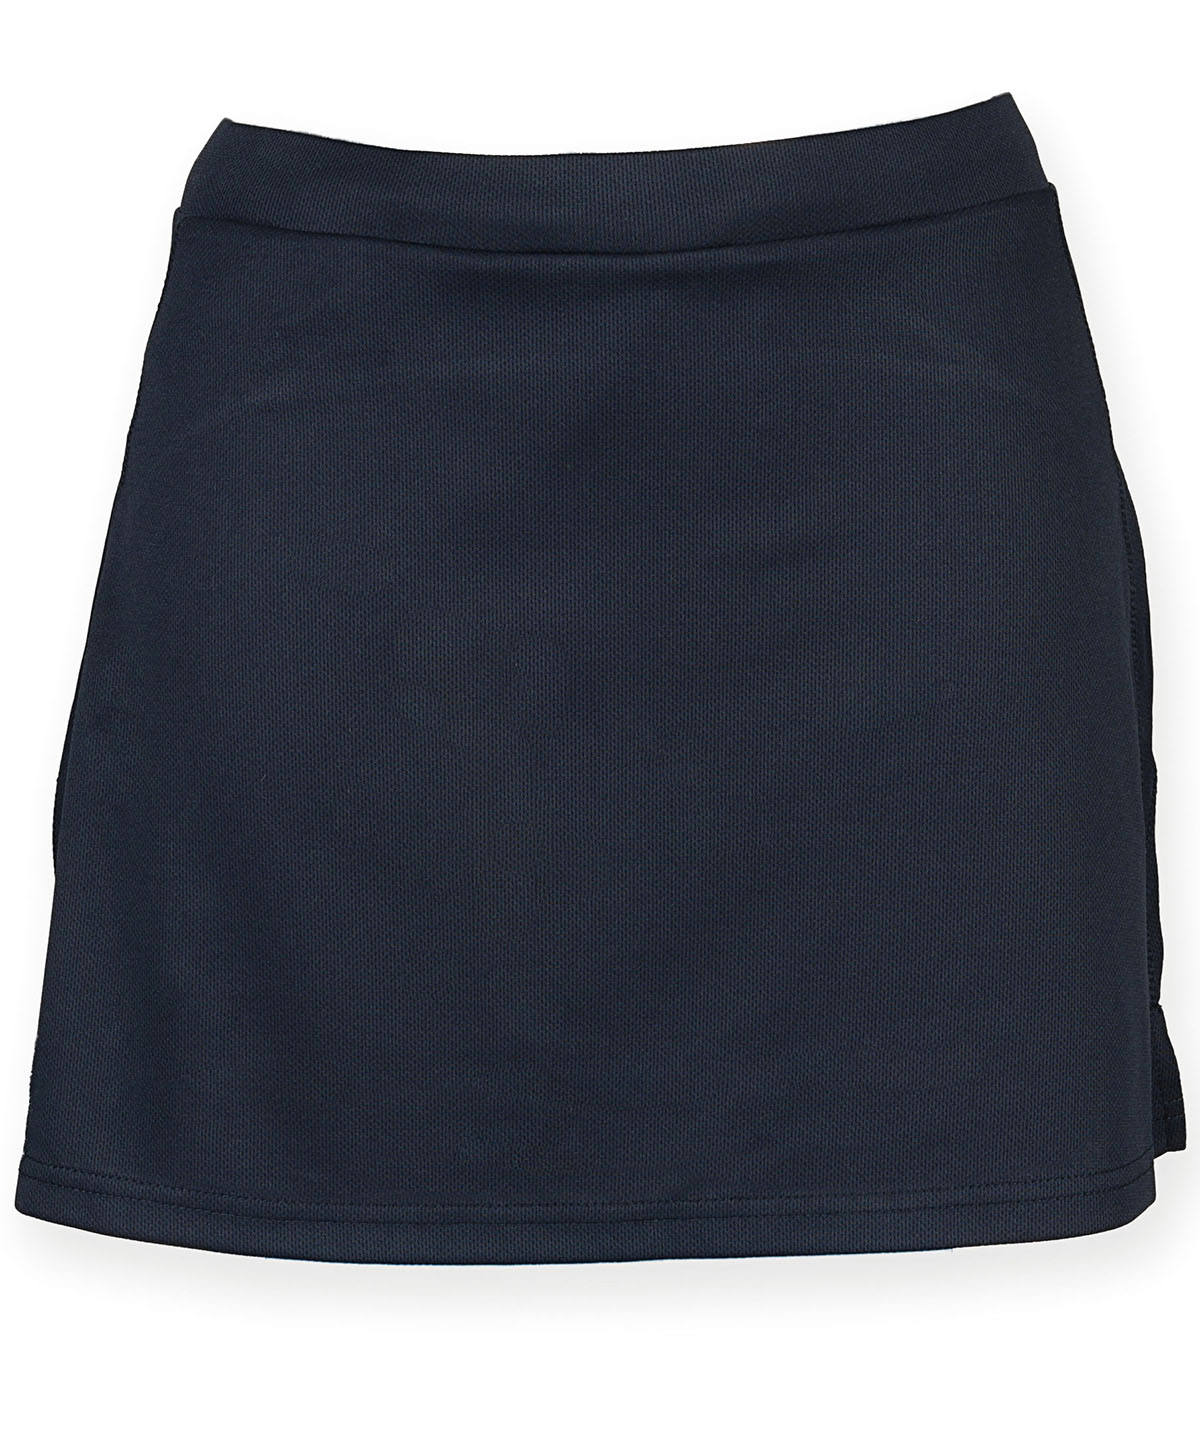 Womens Skort With Wicking Finish Navy Size Large